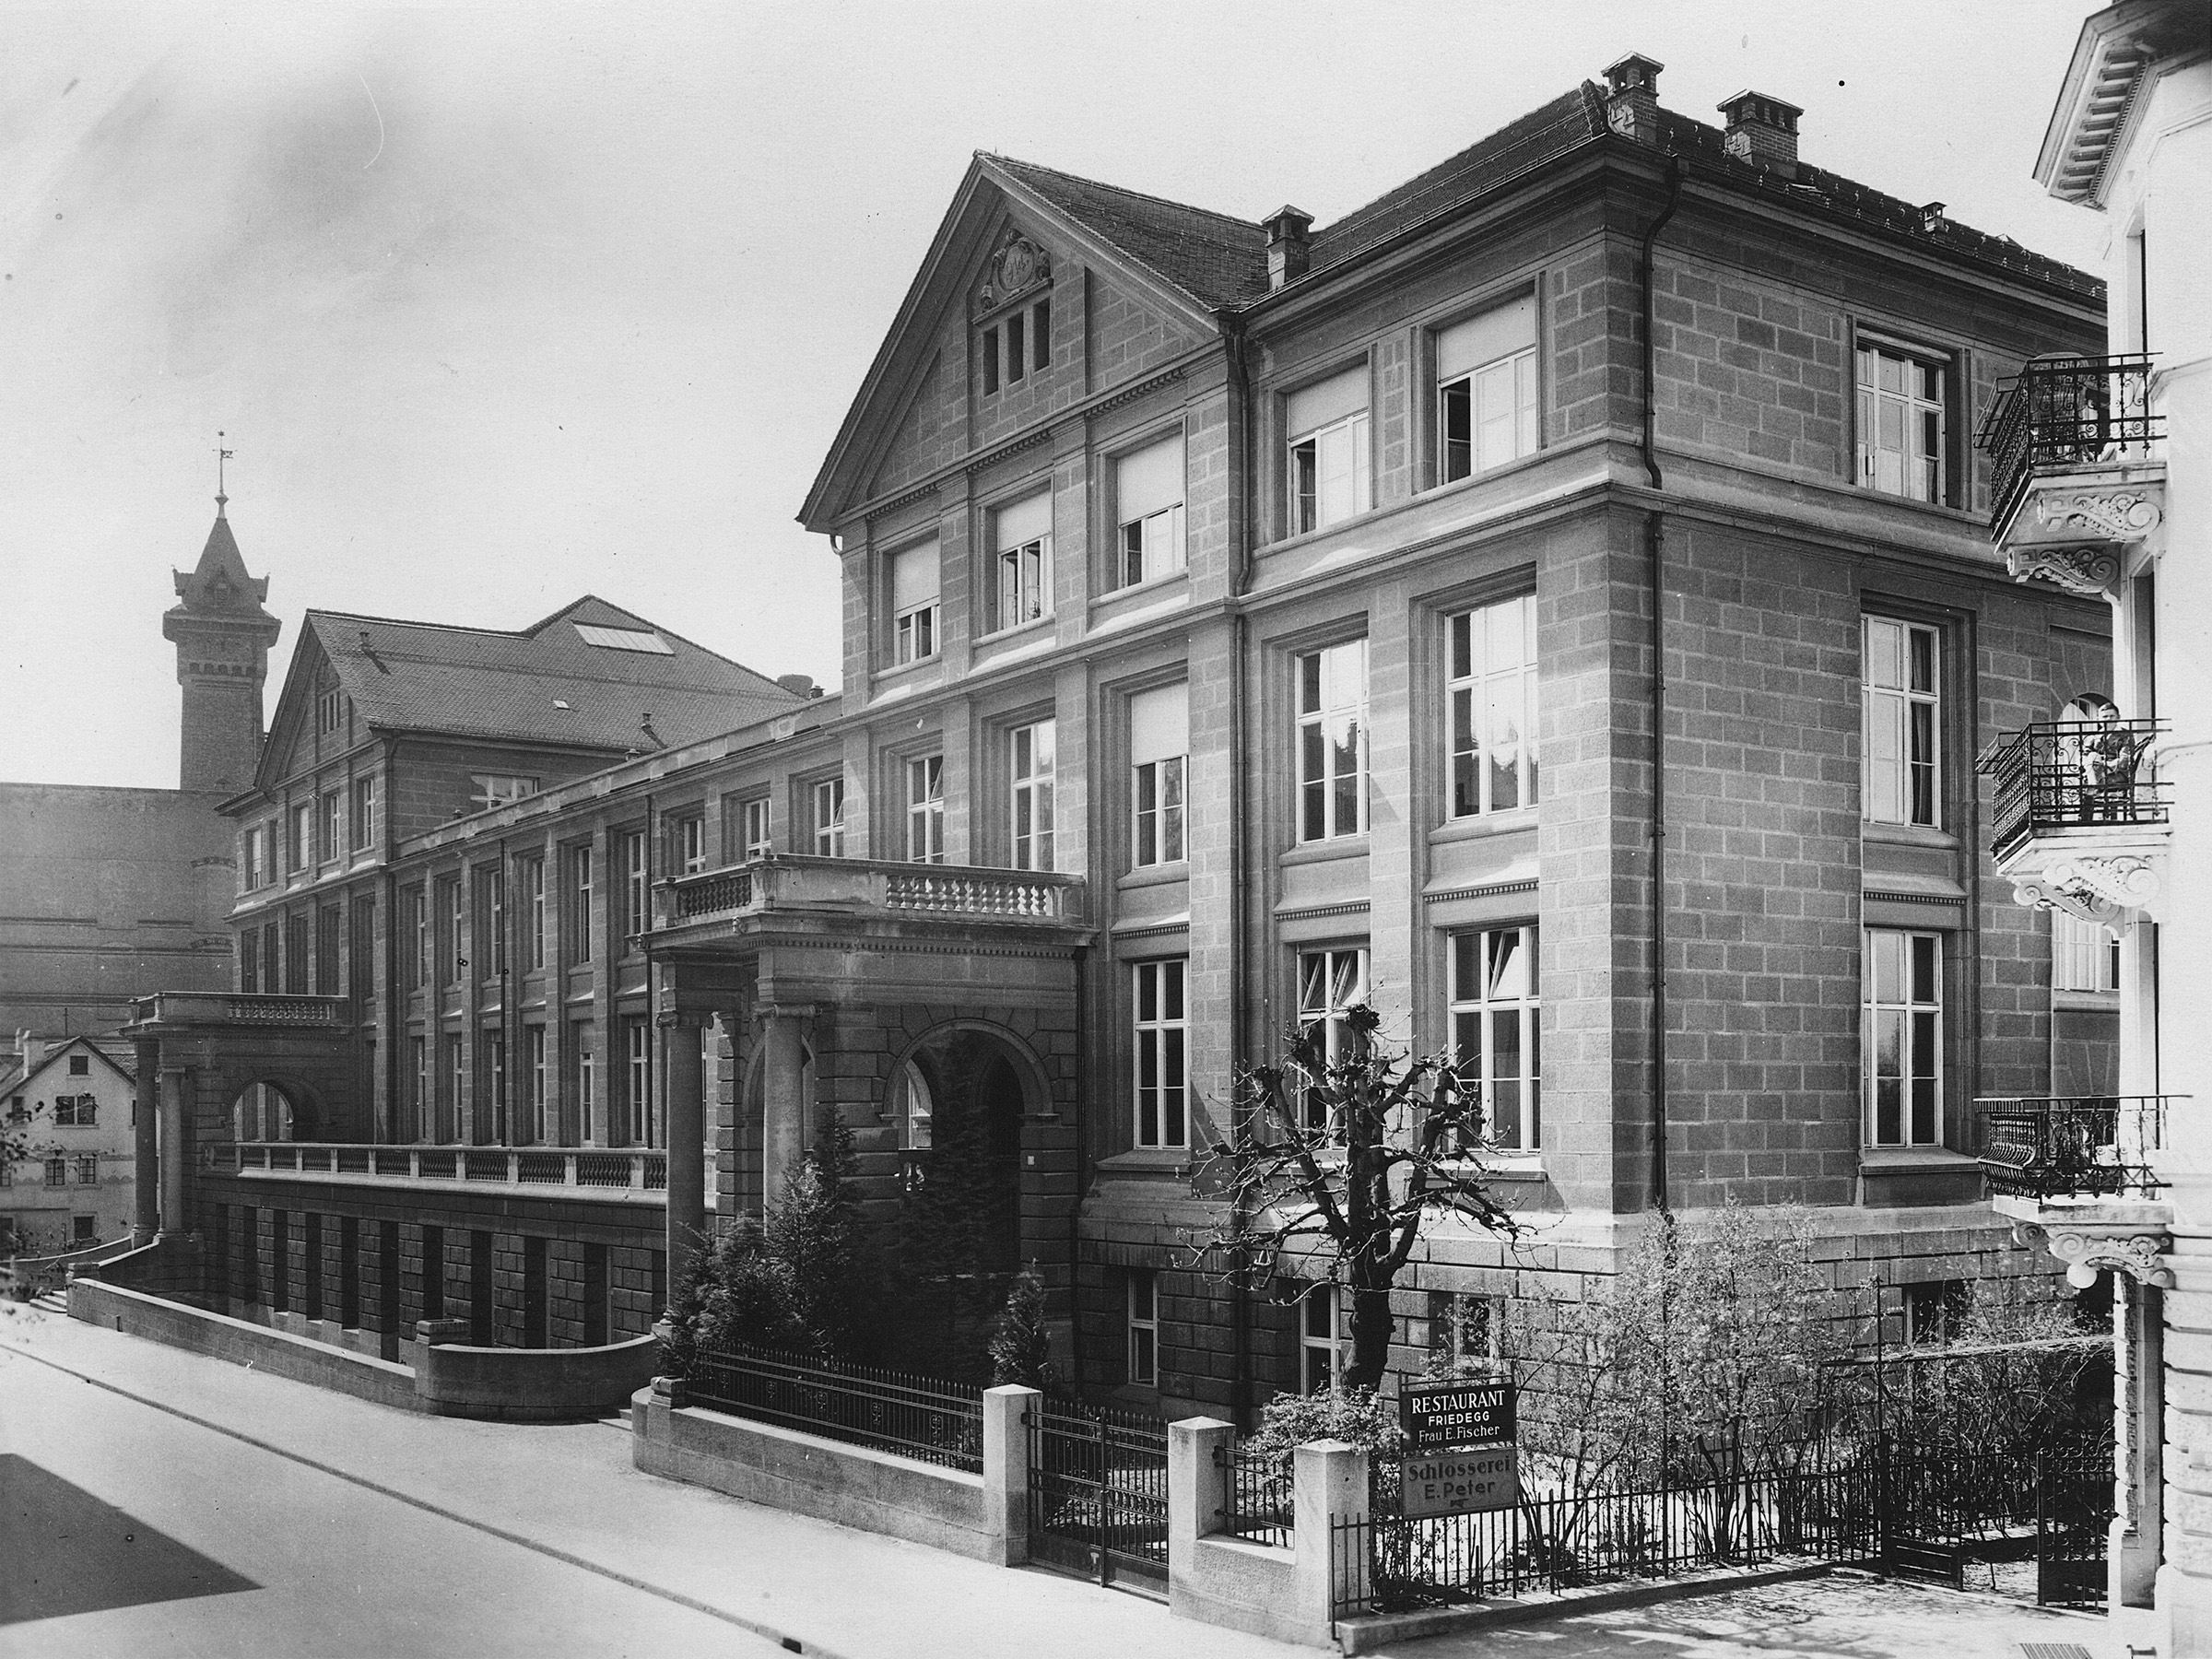 Enlarged view: Exterior view of the natural sciences building east, view from Sonneggstrasse, around 1925